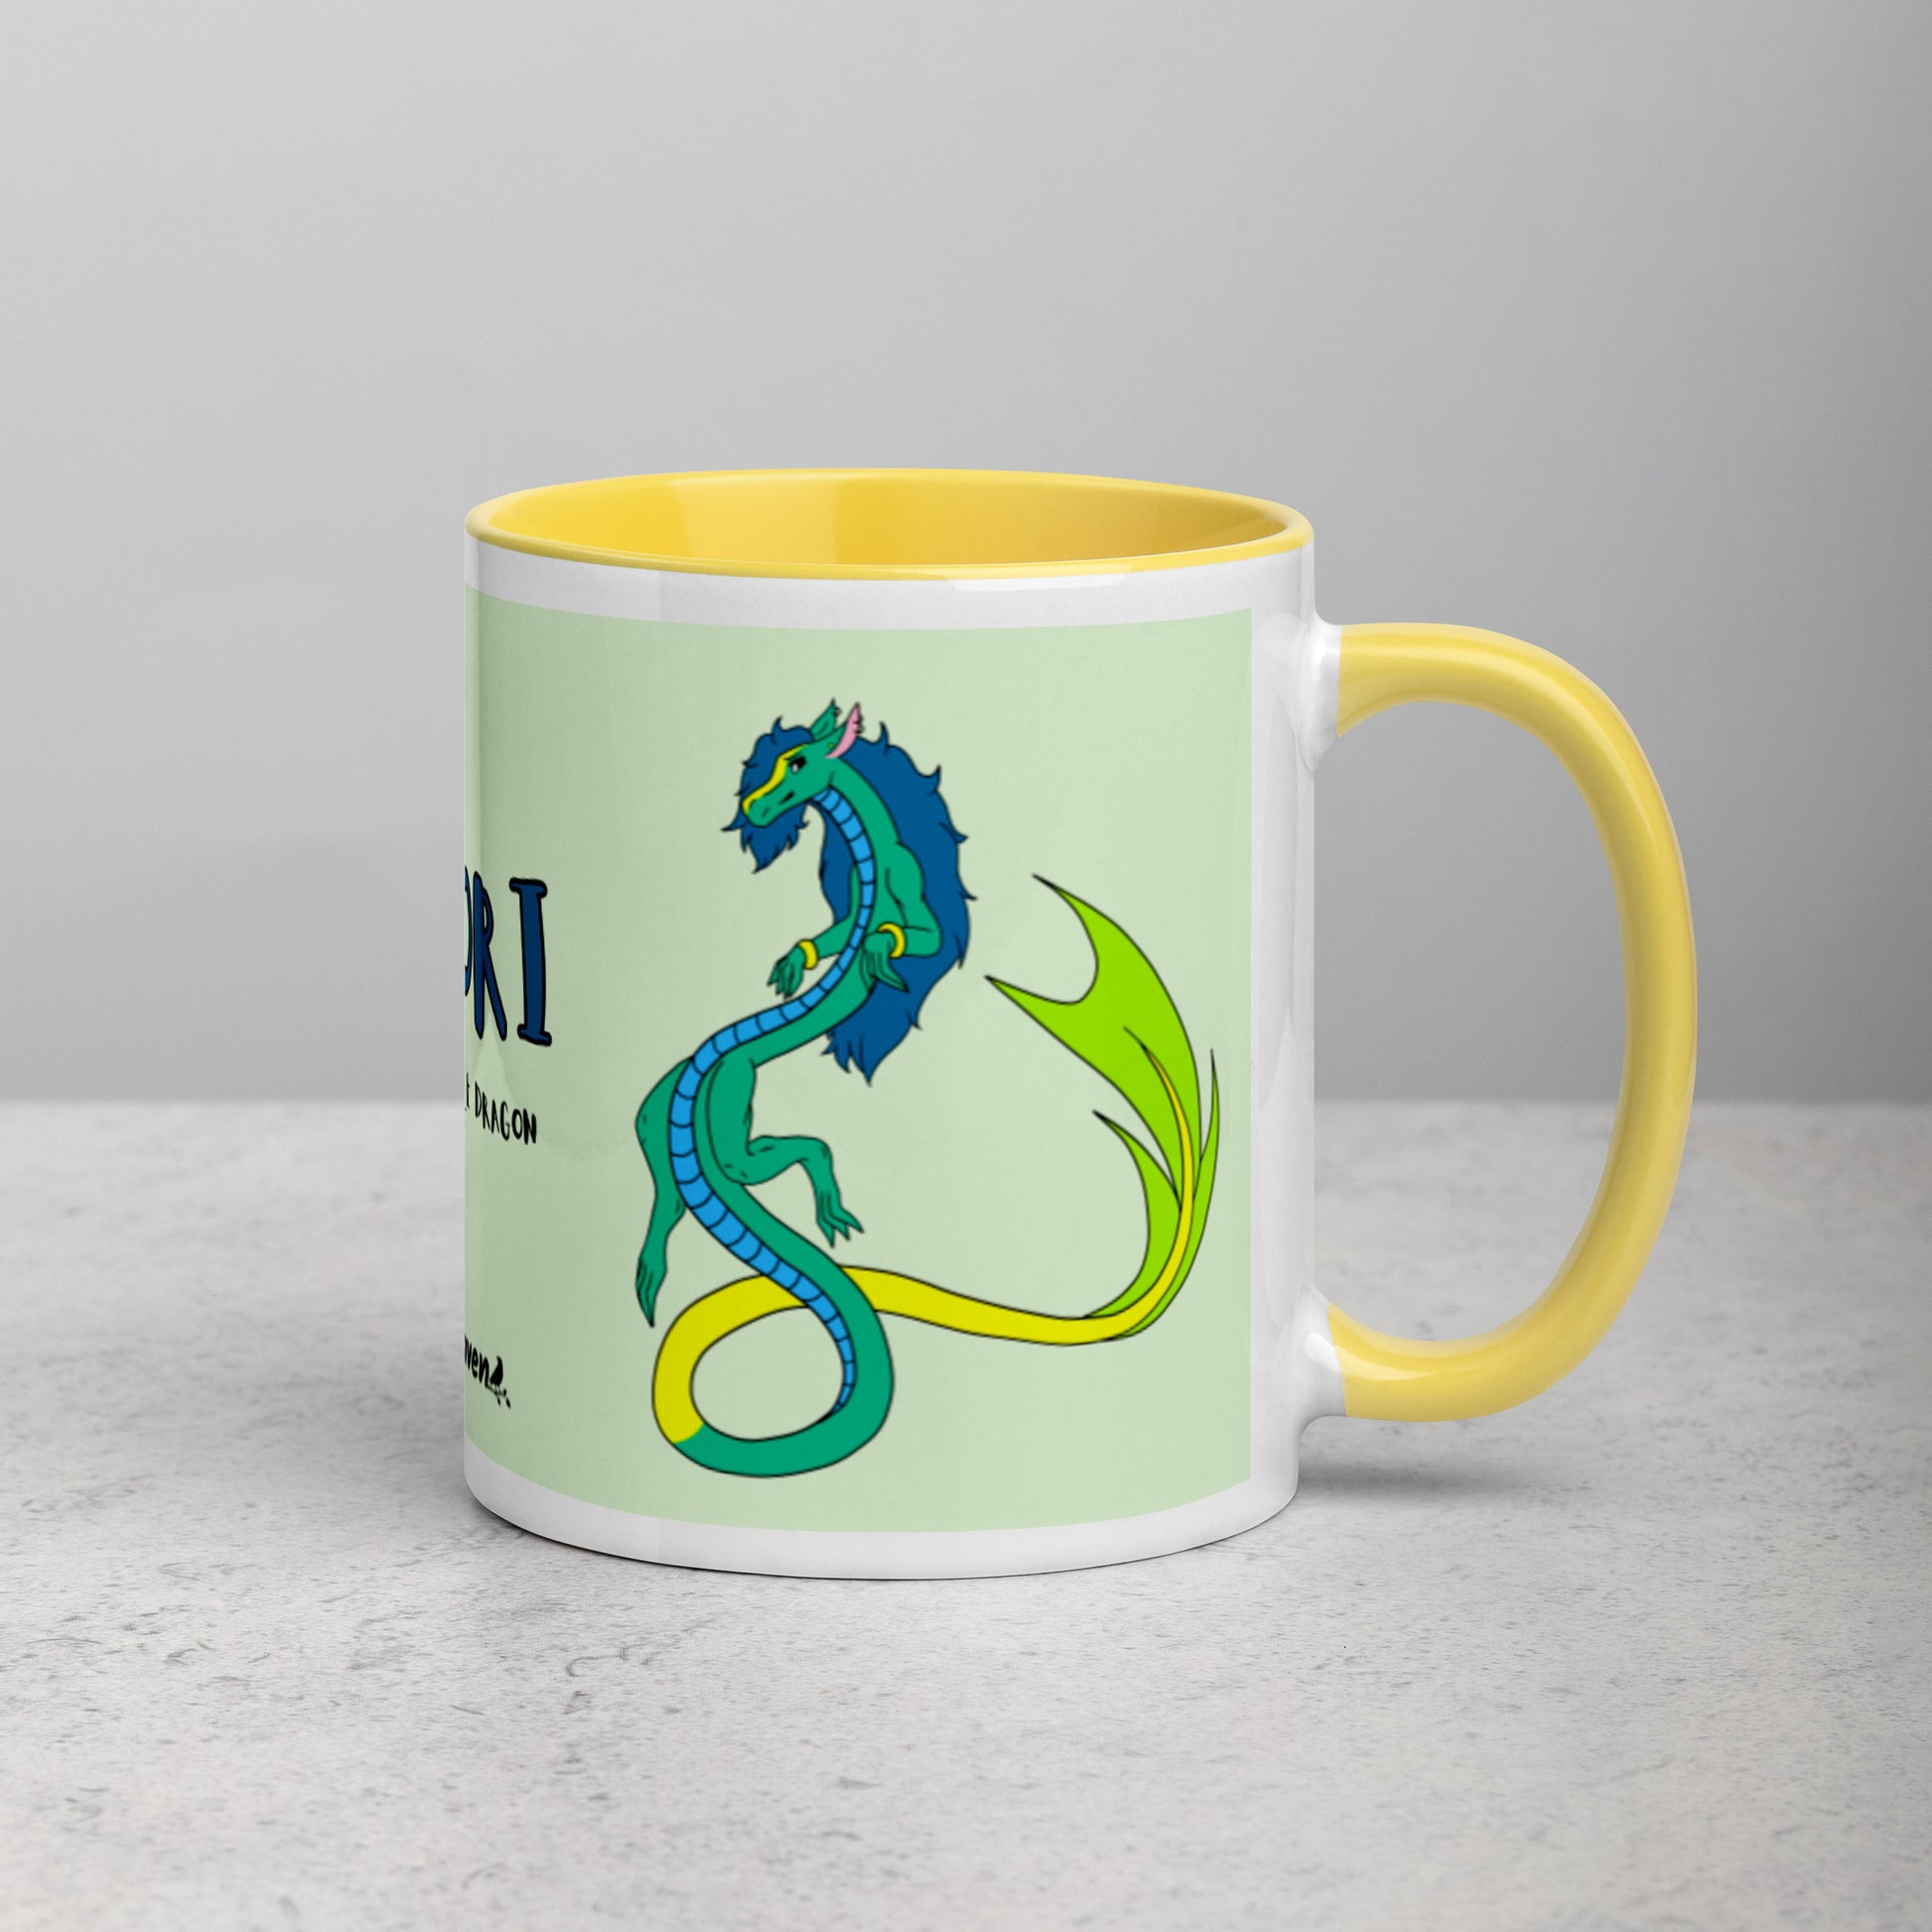 11 ounce white ceramic mug. Yellow inside and handle. Features double-sided image of Mikori the Fuzzy Noodle Dragon. Shown on tabletop with handle facing right.